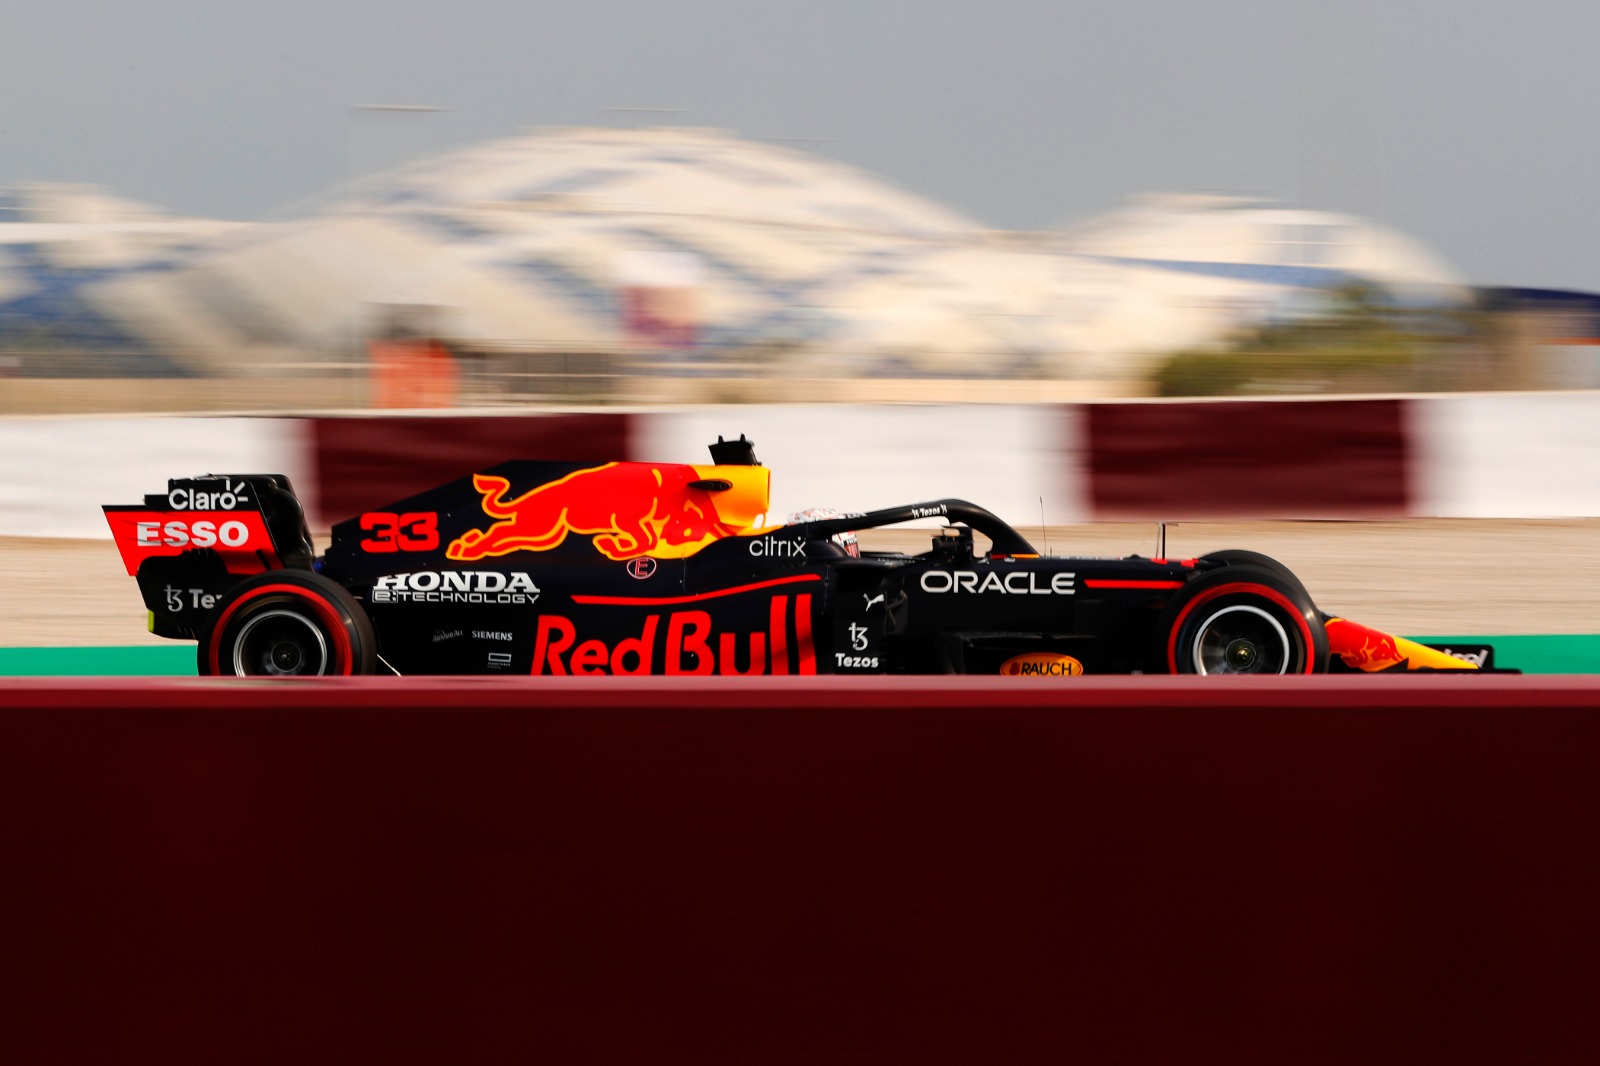 Qatar F1 spectacle a sell-out as LCSC gets ready for record turnout 